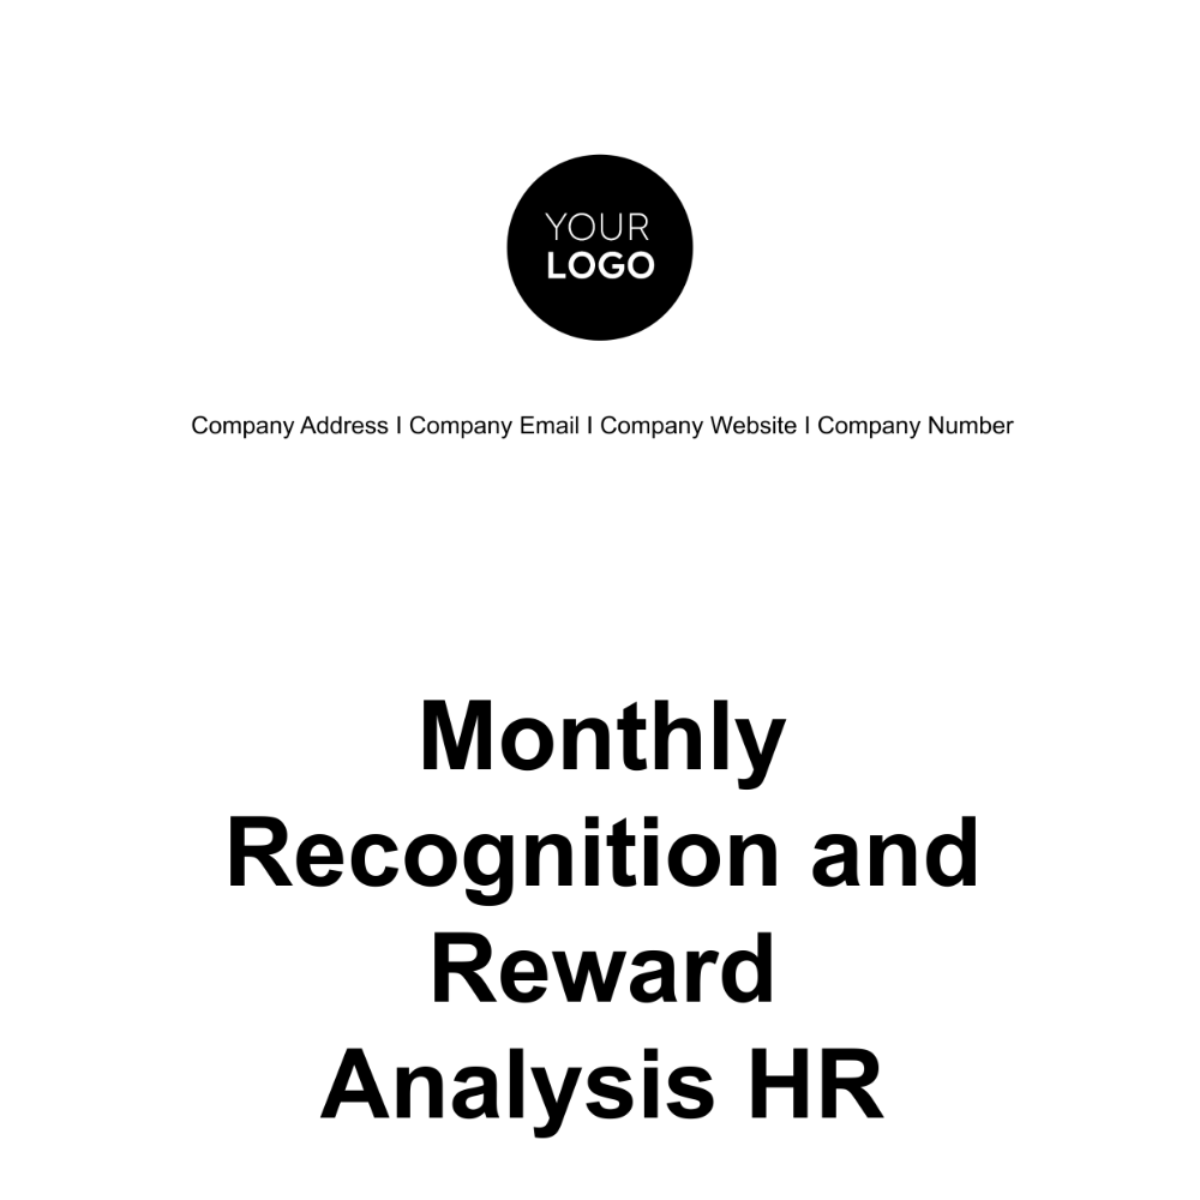 Monthly Recognition and Reward Analysis HR Template